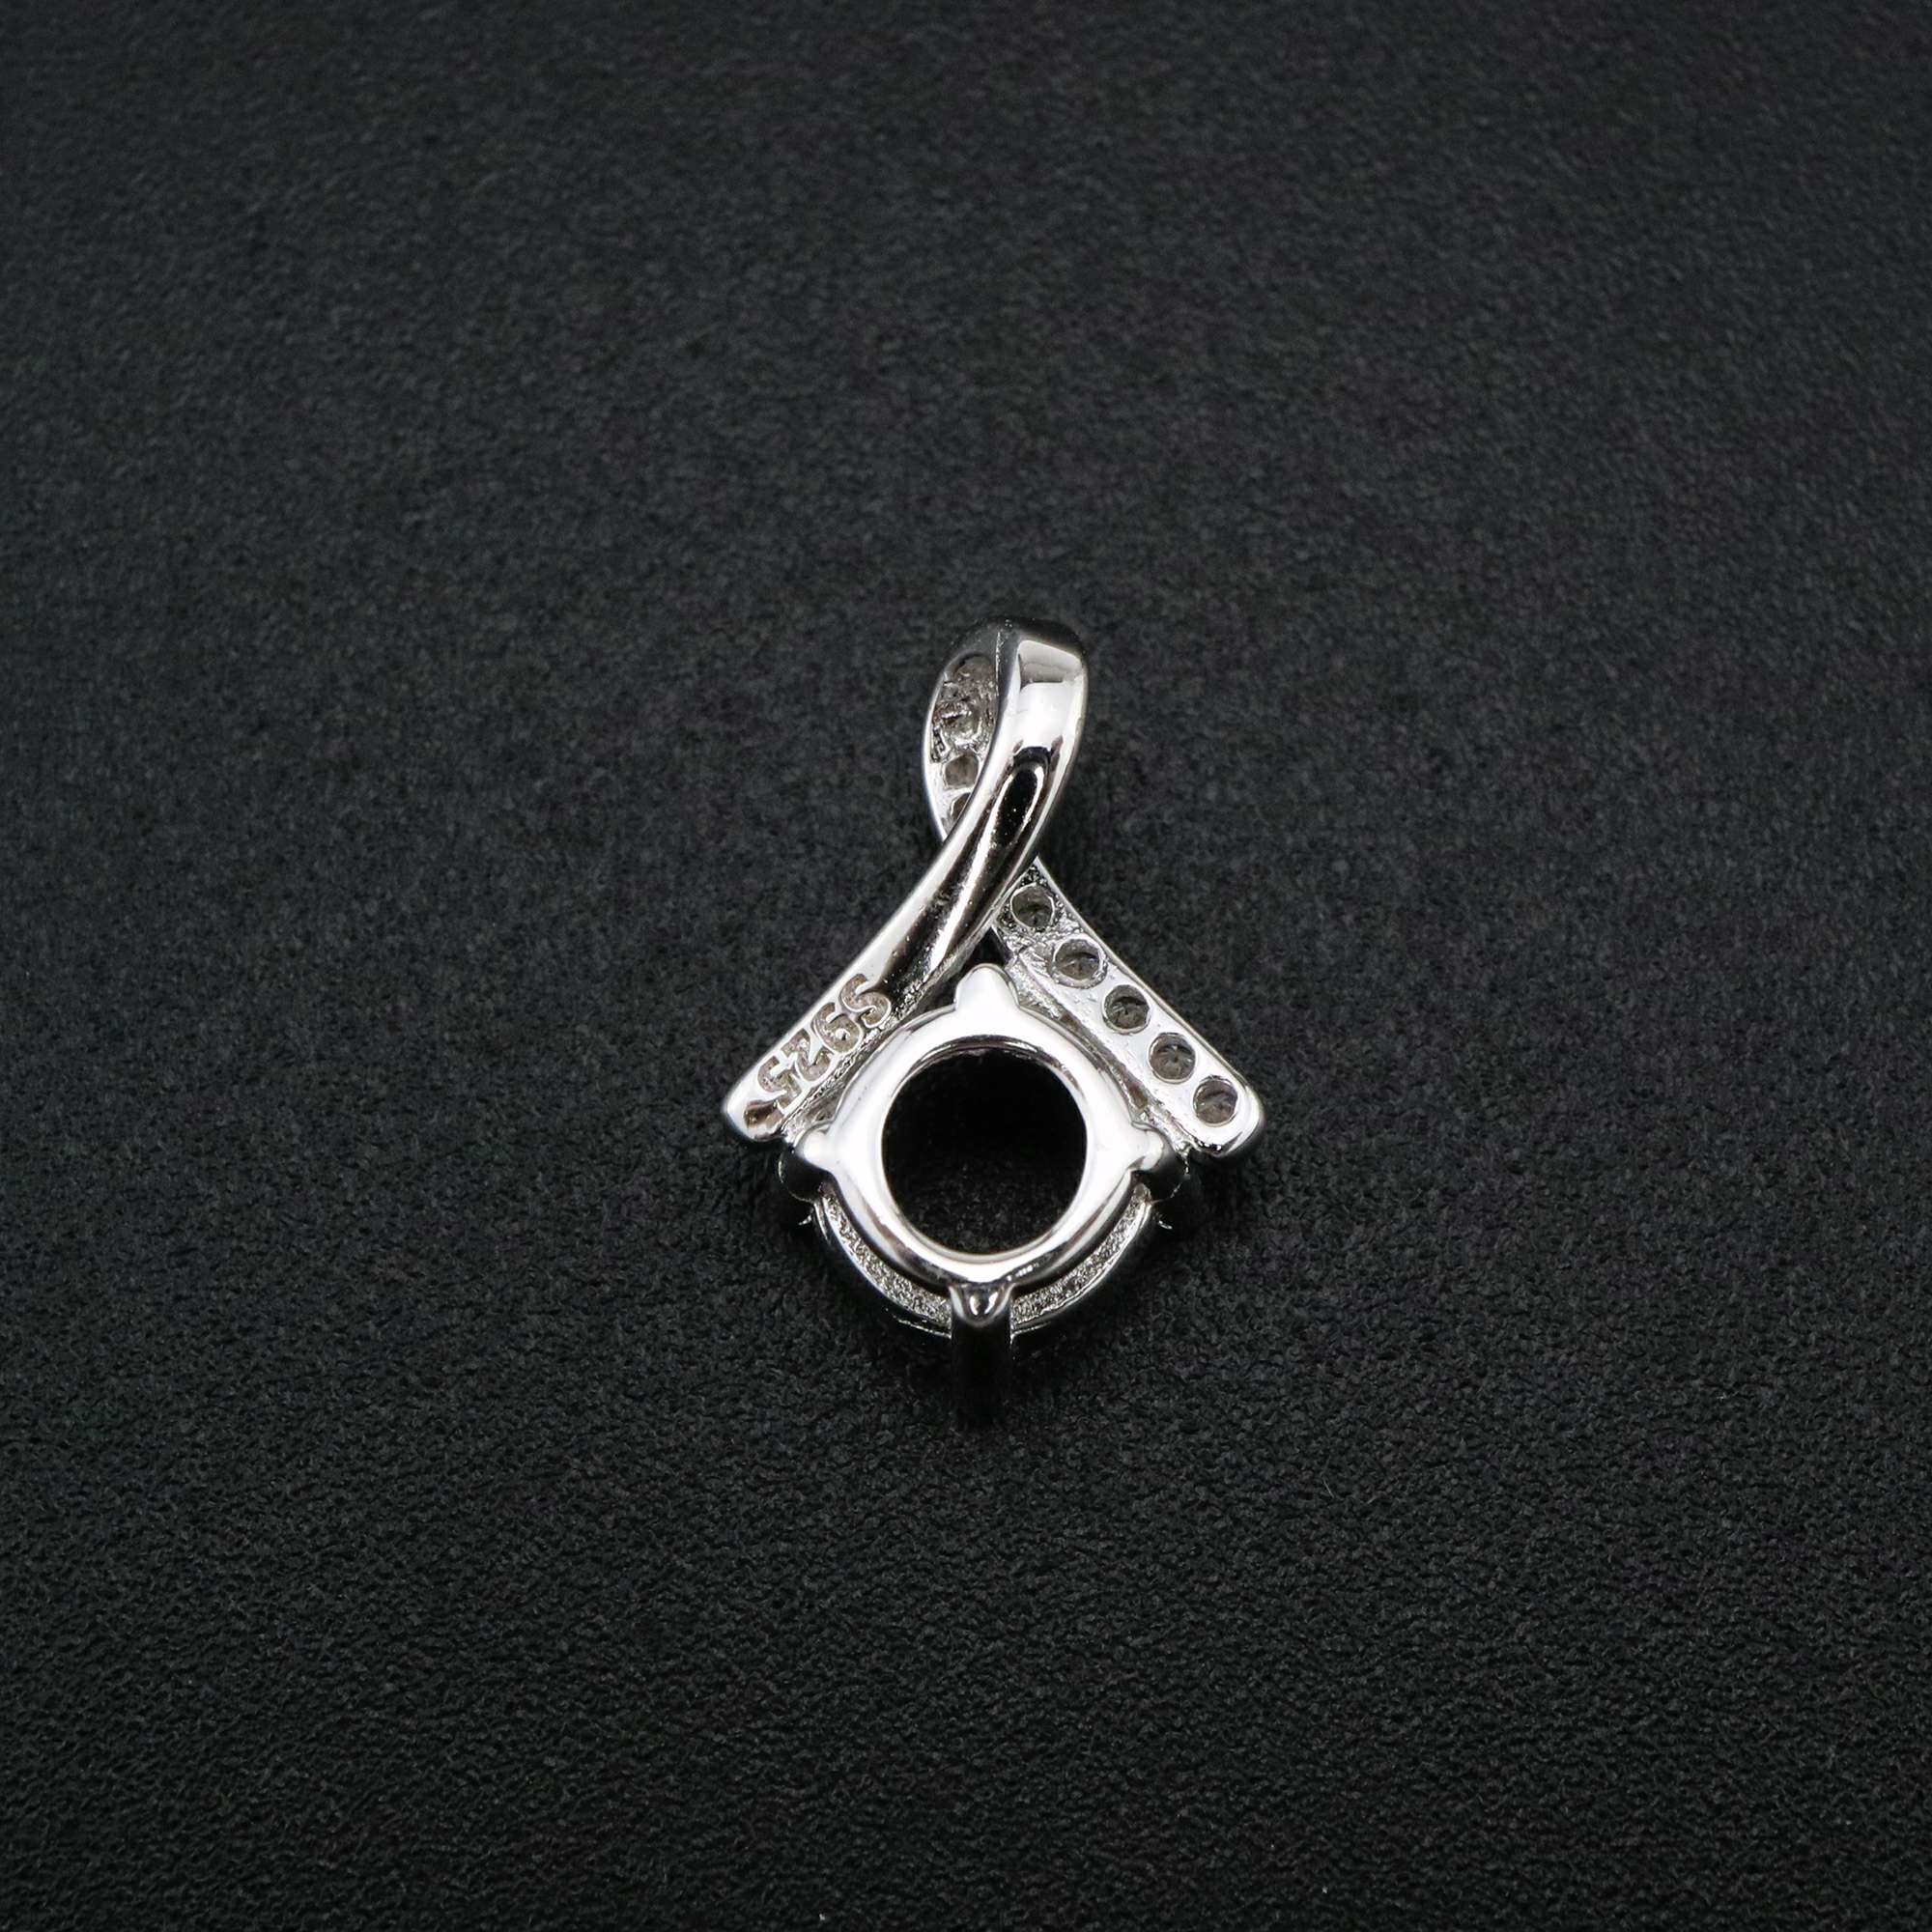 1Pcs 6-8MM Round Prong Pendant Settings Solid 925 Sterling Silver Gesmtone Charm Bezel Tray DIY Supplies 1411256 - Click Image to Close